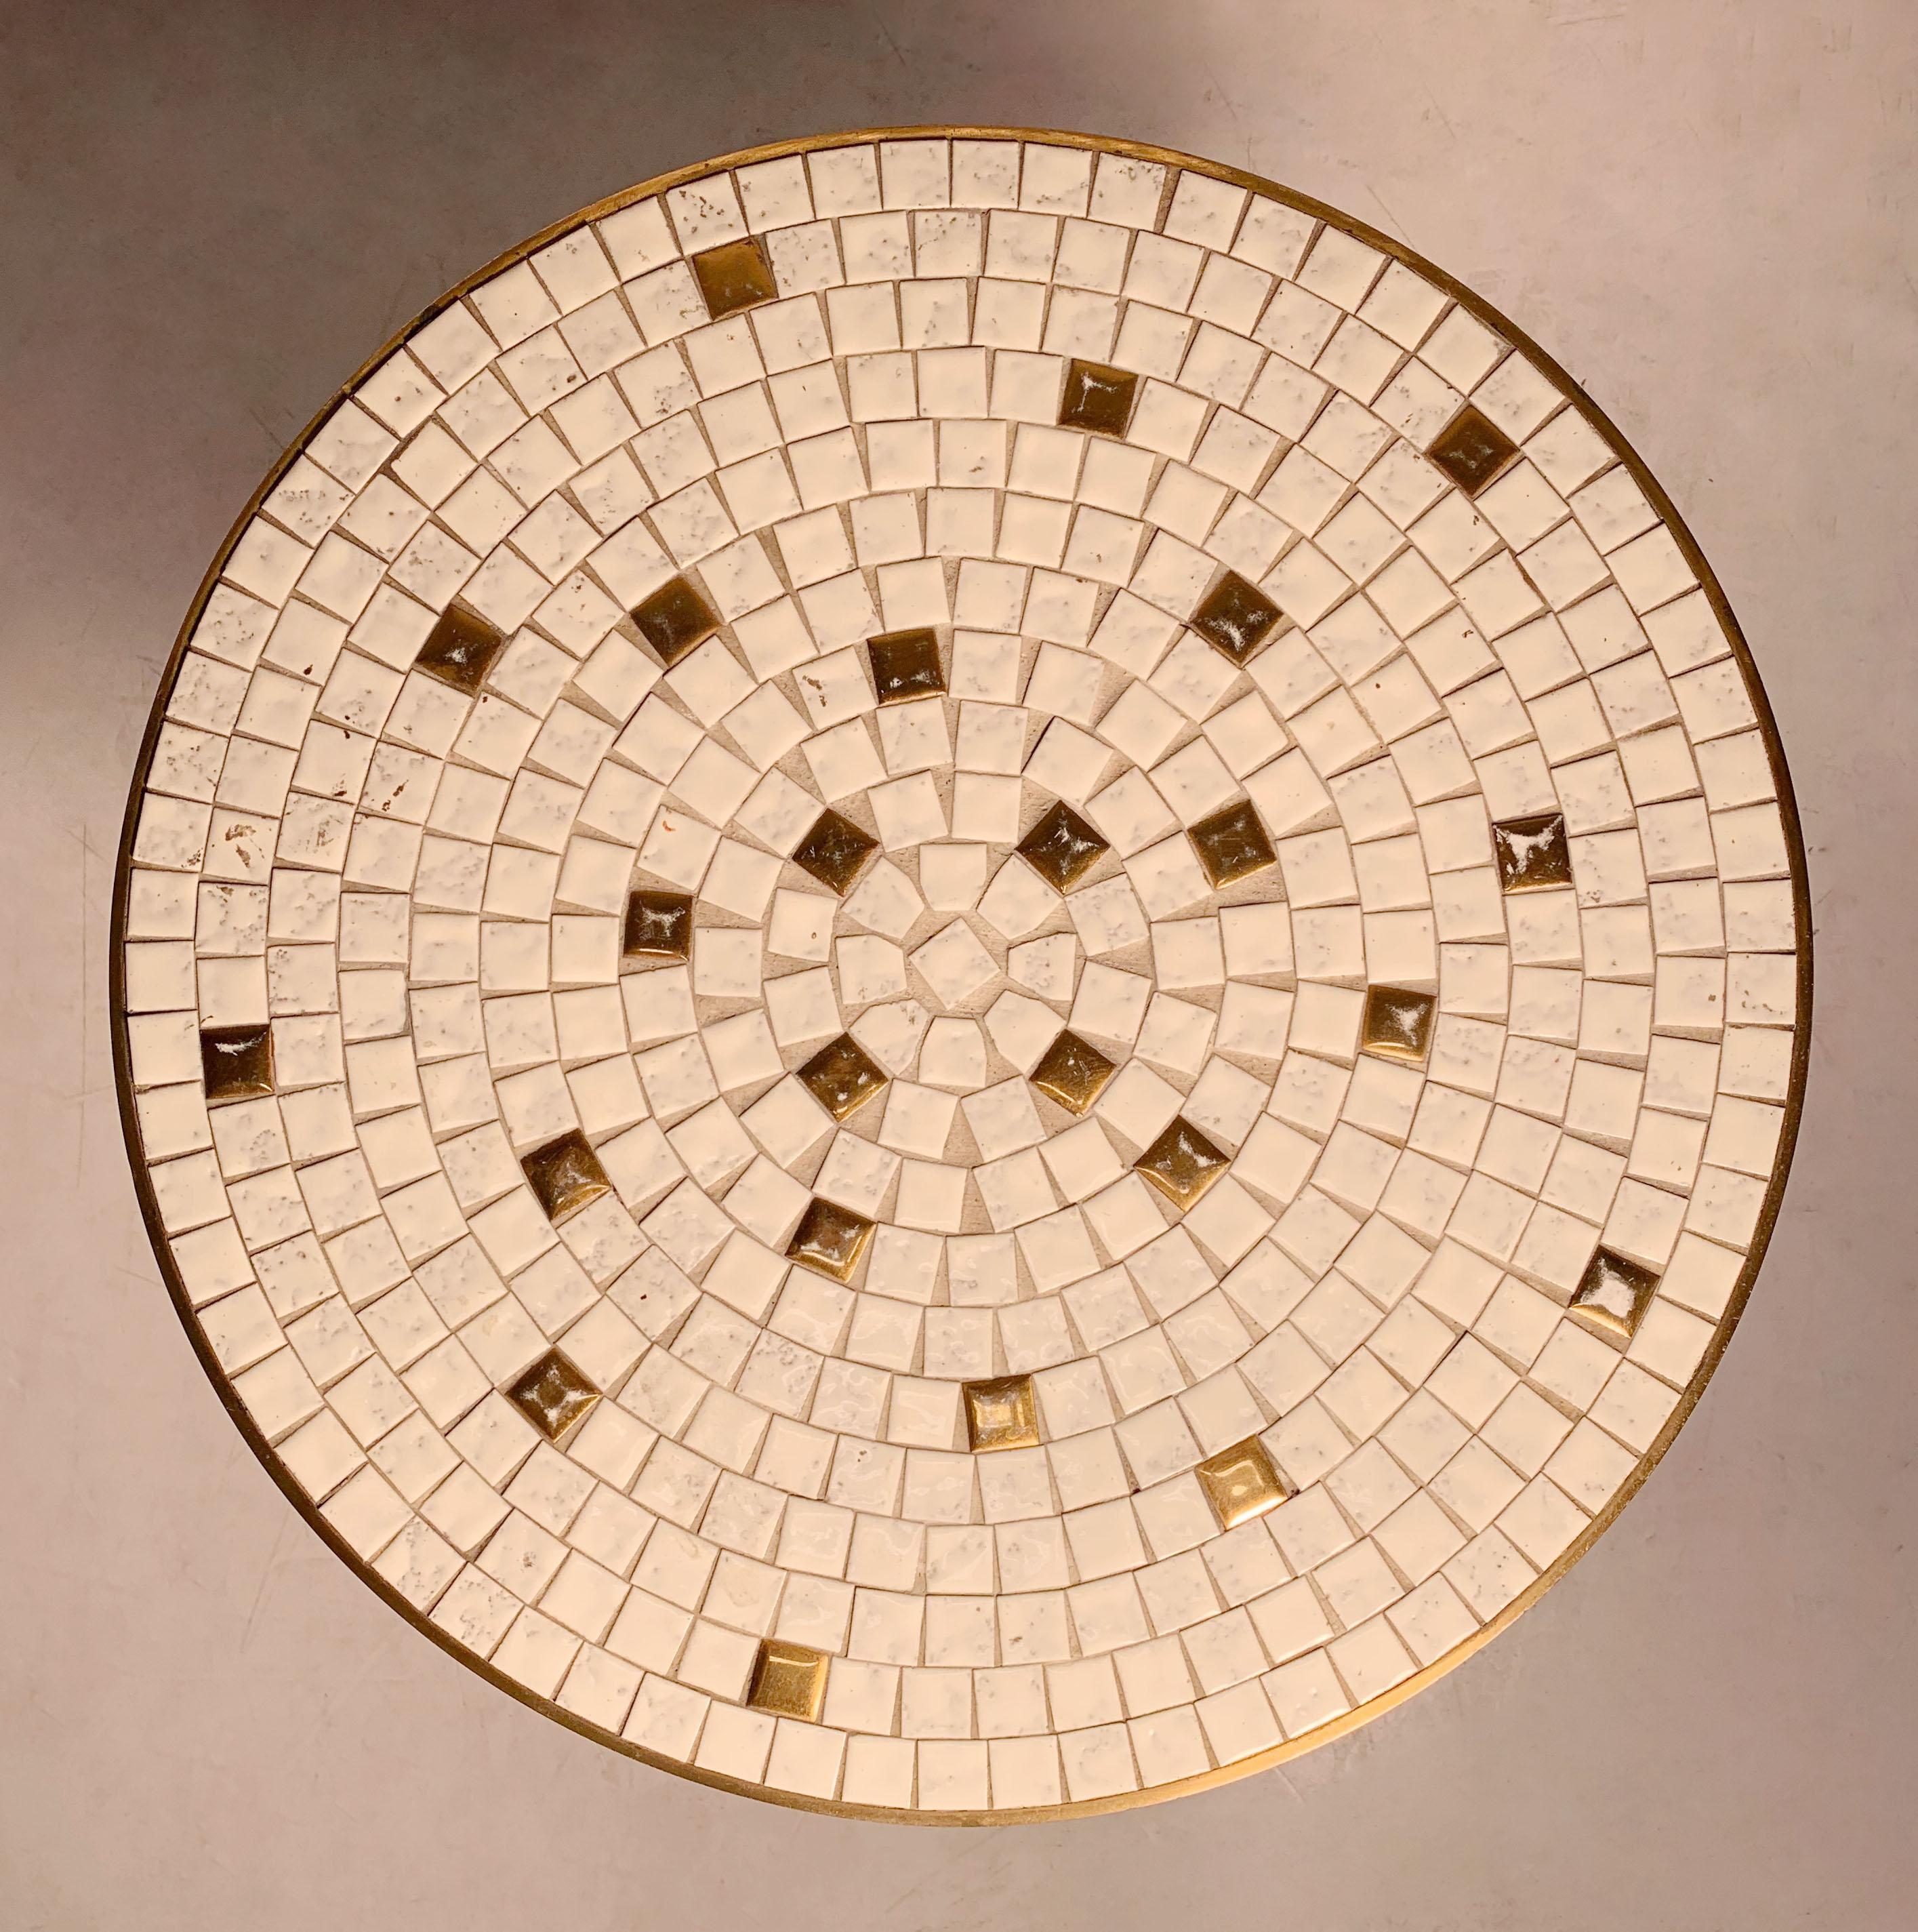 Vintage modern mosaic tile occasional table. Solid brass circular frame. Very good craftsmanship. More picture available. Possibly Italian. Uncertain to origin. Manner of Gordon Martz Tile Tops.

I have a second one that is semi matching. very